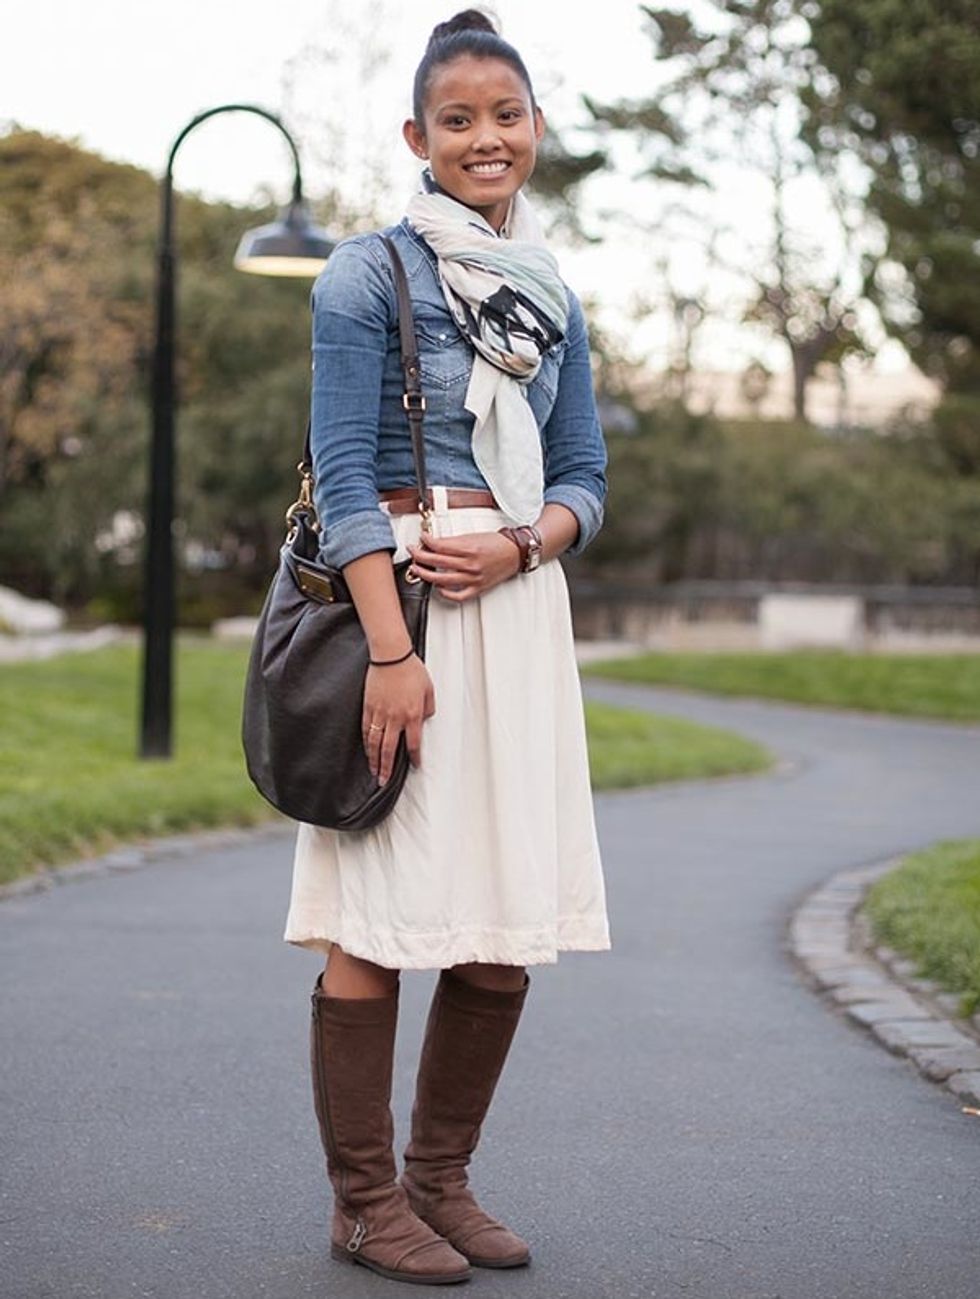 Street Style Report: A Modern Southern Belle at the Embarcadero